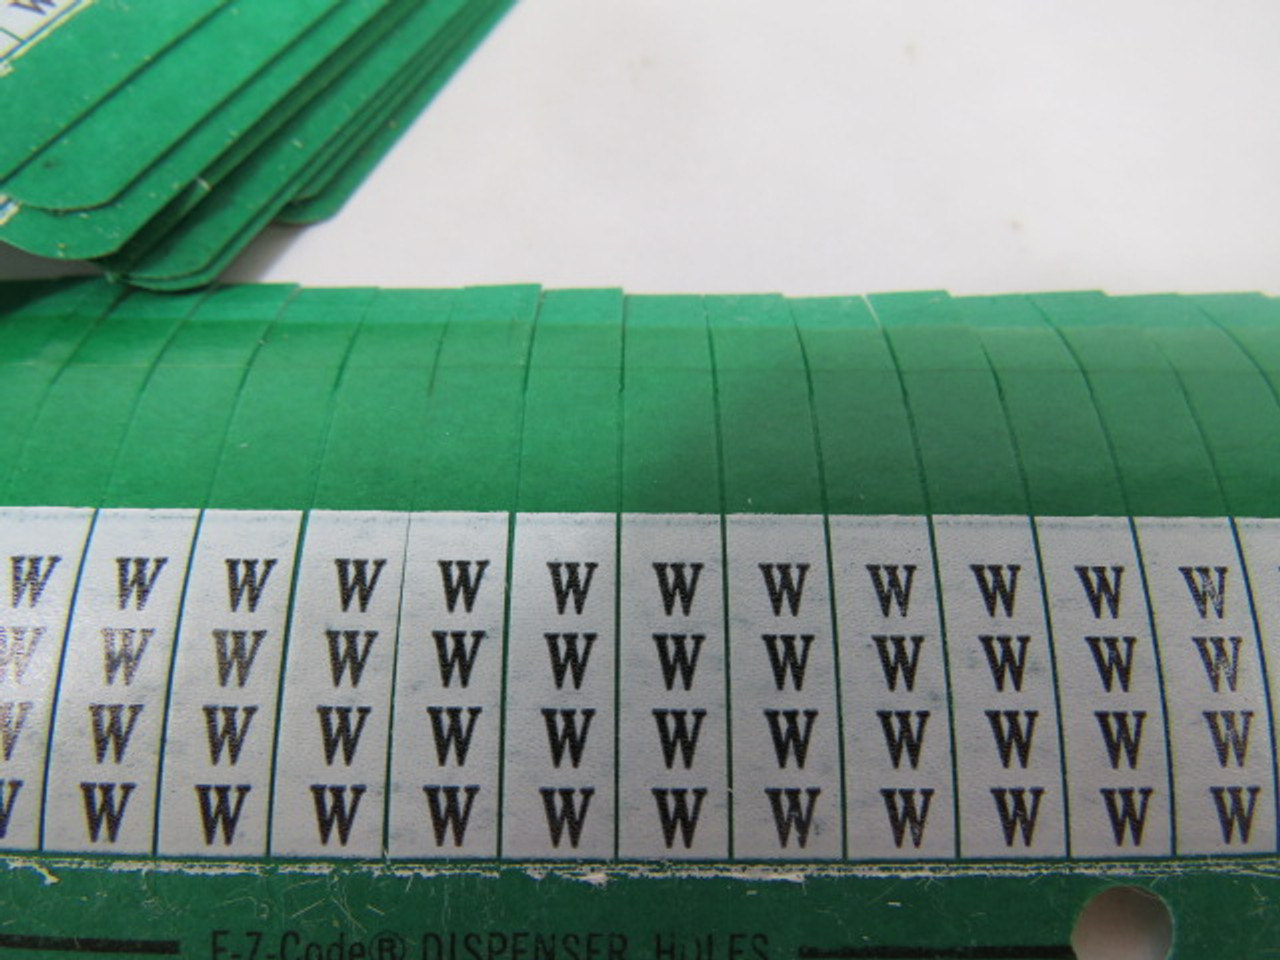 Thomas & Betts W Green E-Z-Code Wire Markers Lot of 9 ! NEW !